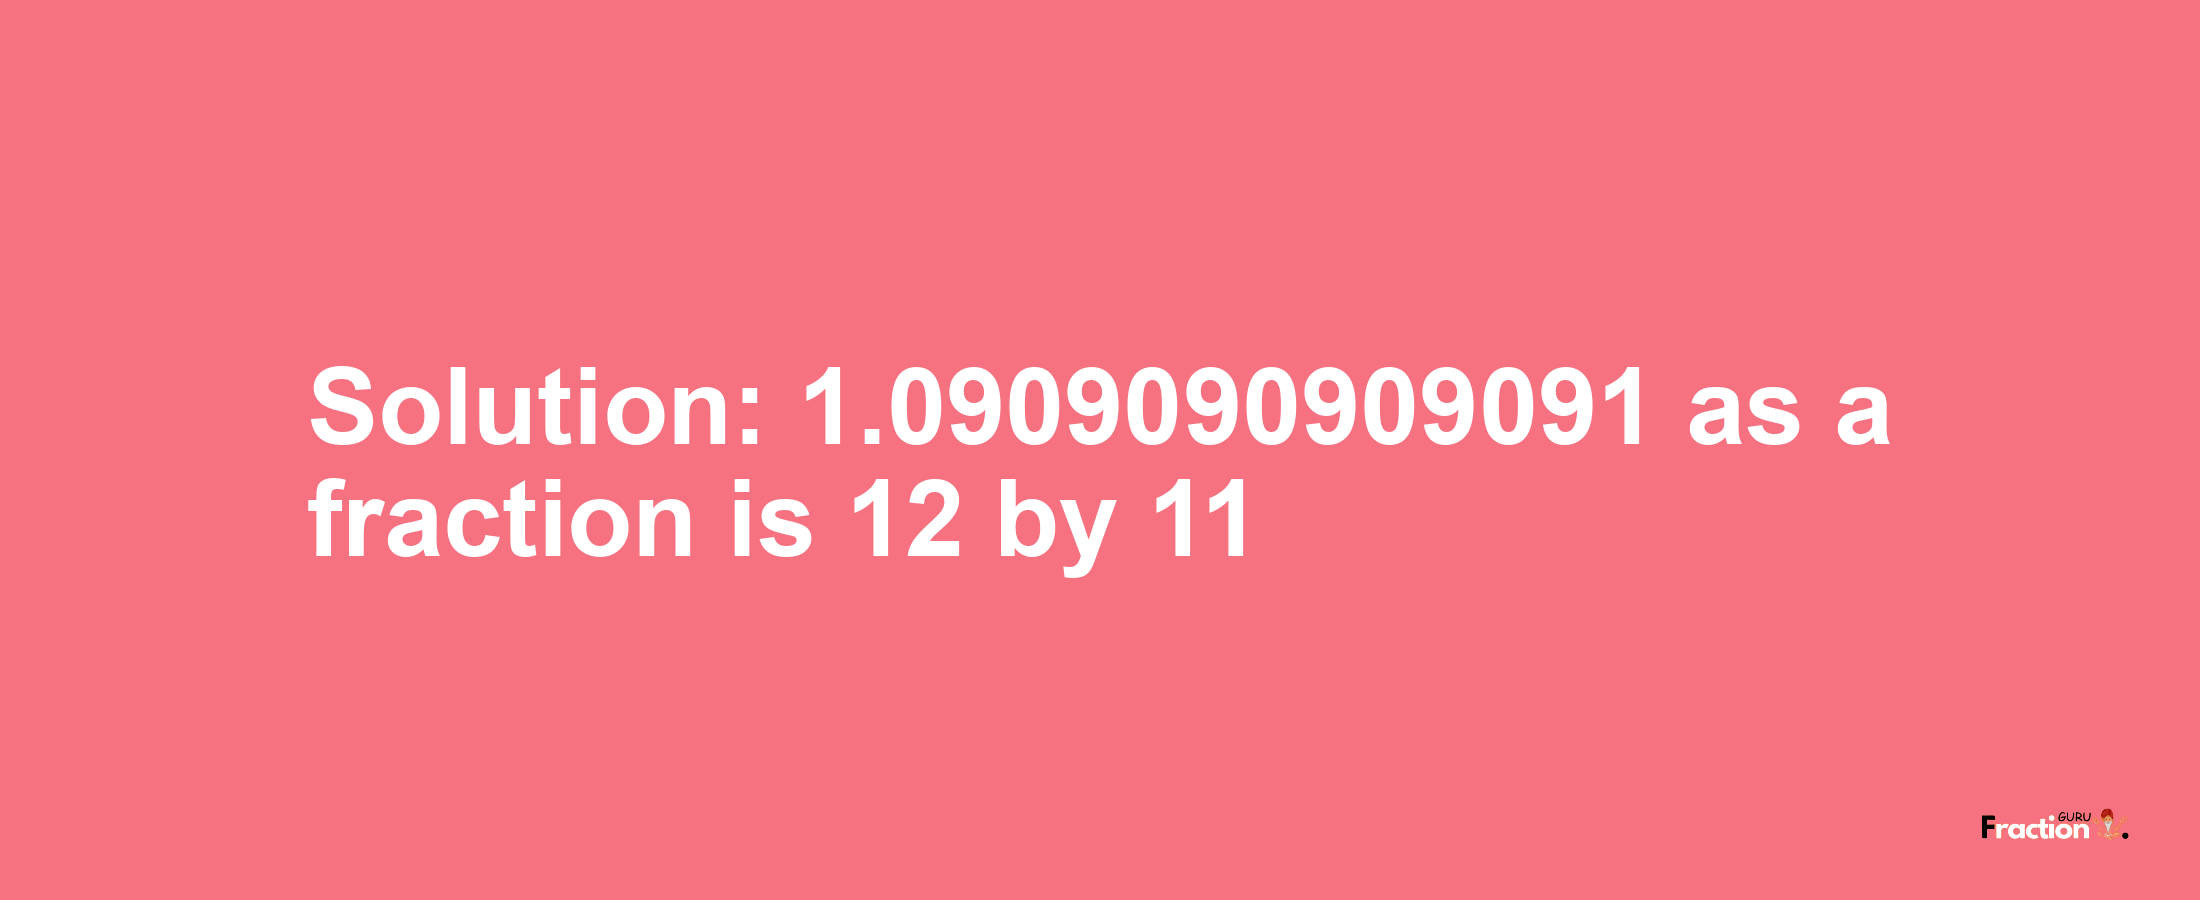 Solution:1.0909090909091 as a fraction is 12/11